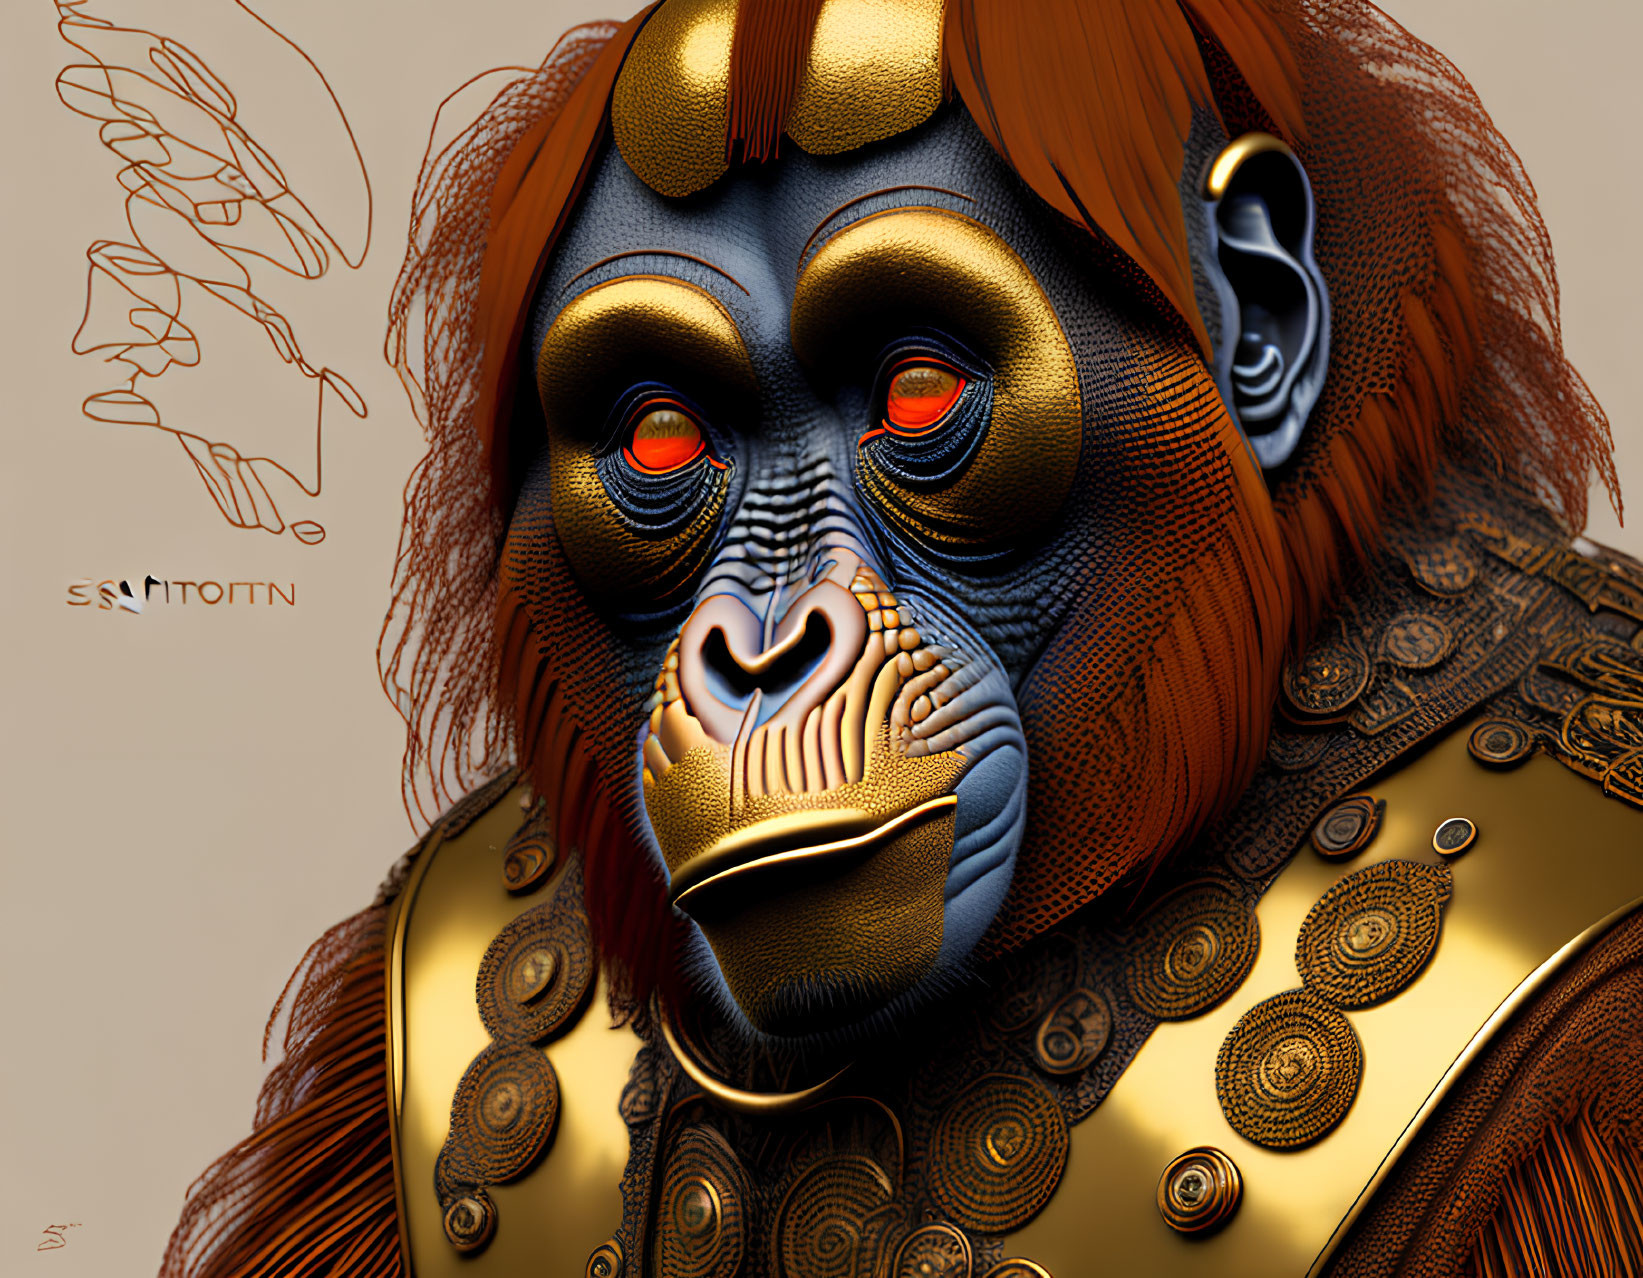 Stylized Mandrill Artwork with Golden Patterns on Beige Background